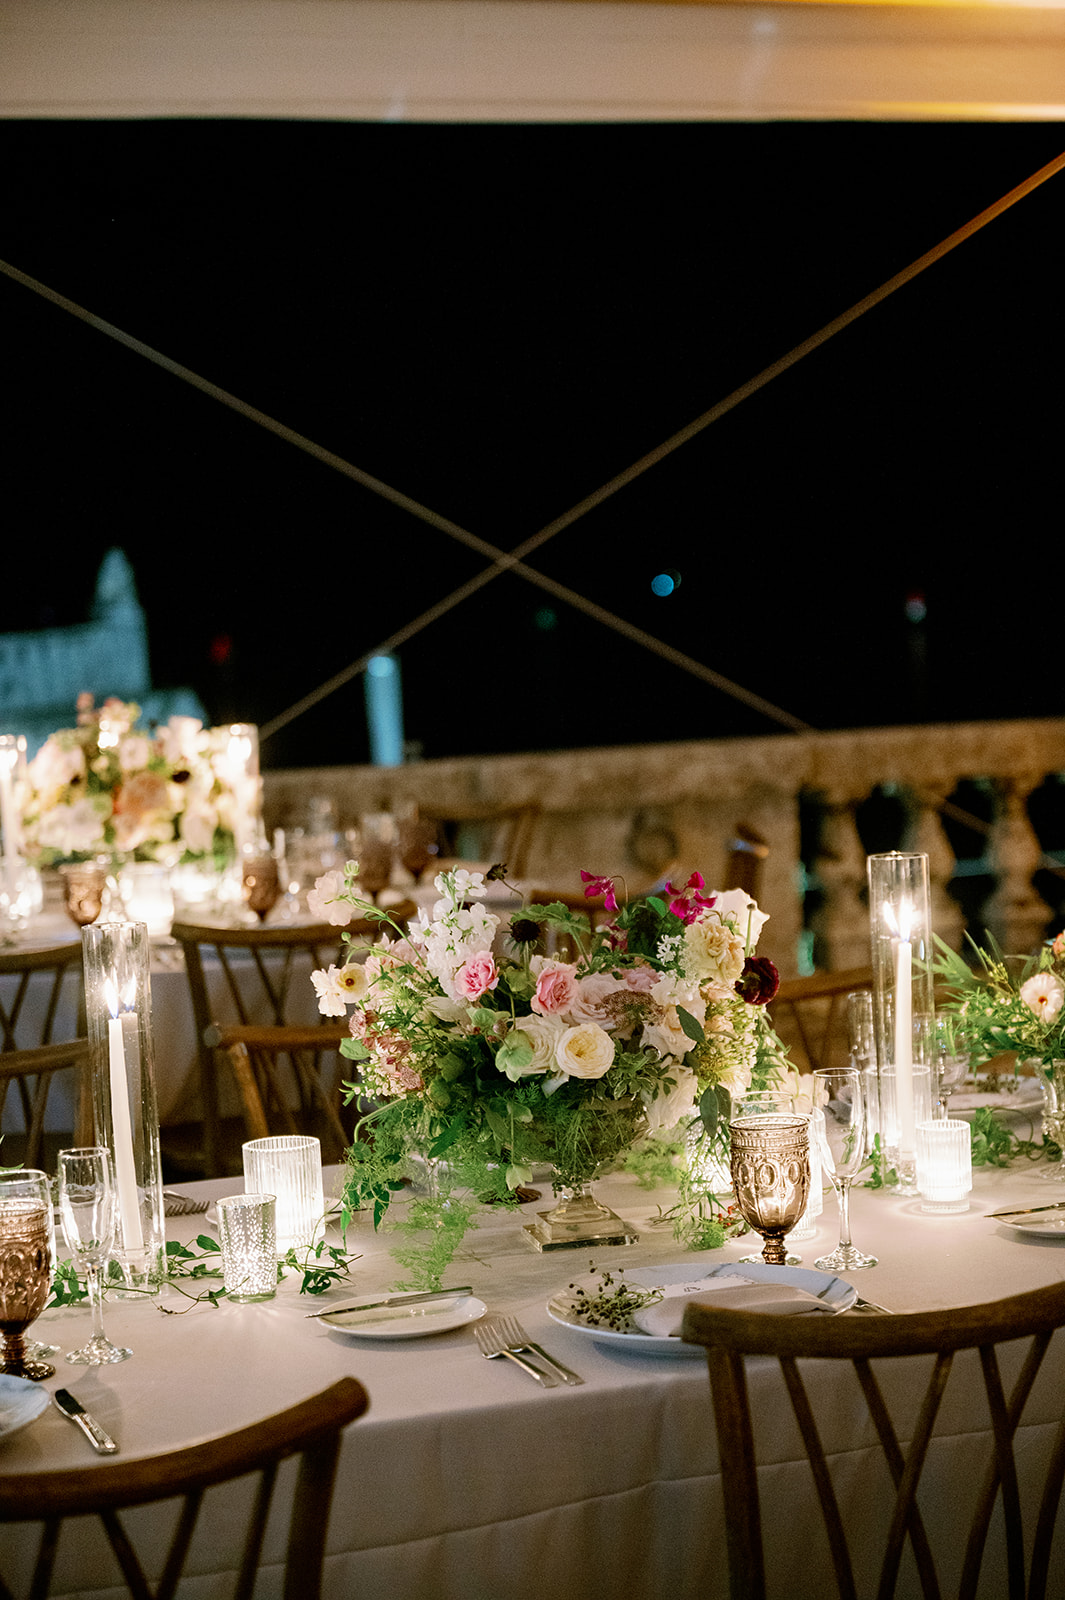 Romantic candlelit tented wedding reception dinner at Vizcaya Museum and Gardens in Miami.